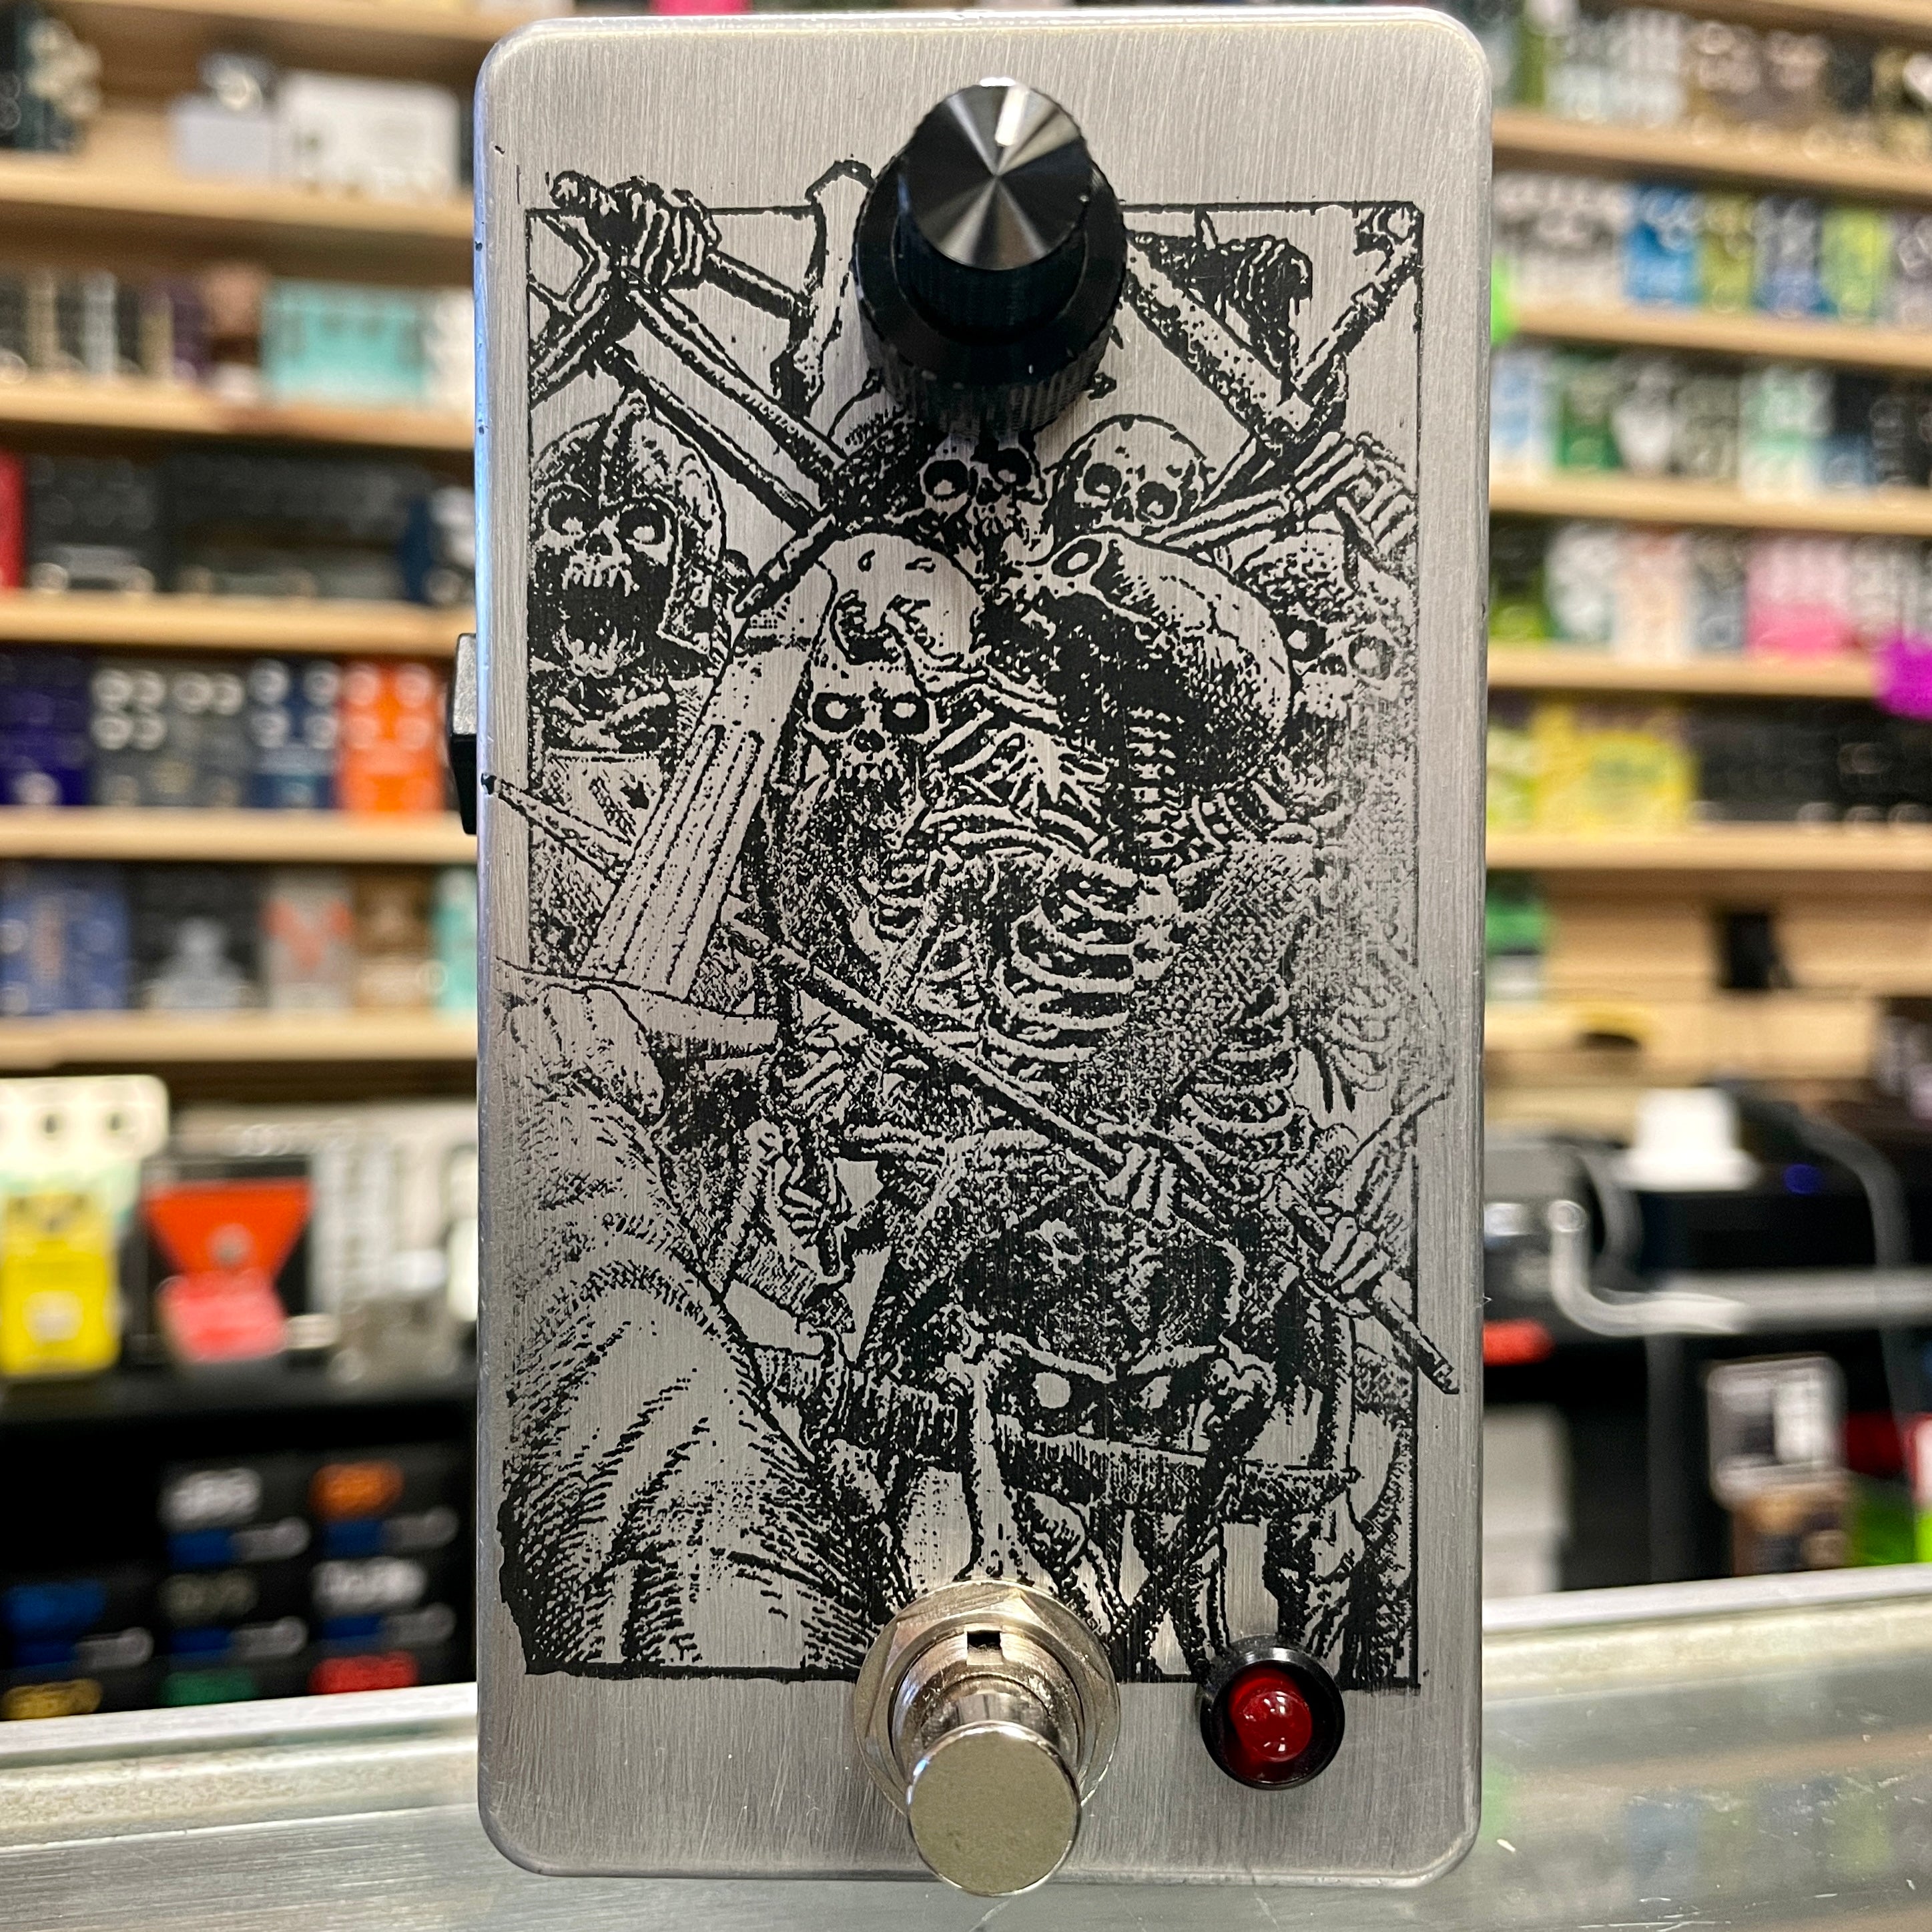 Petey's Pedals - "Skeletons" Concentric Knob Filter Fuzz w/Expression Jack